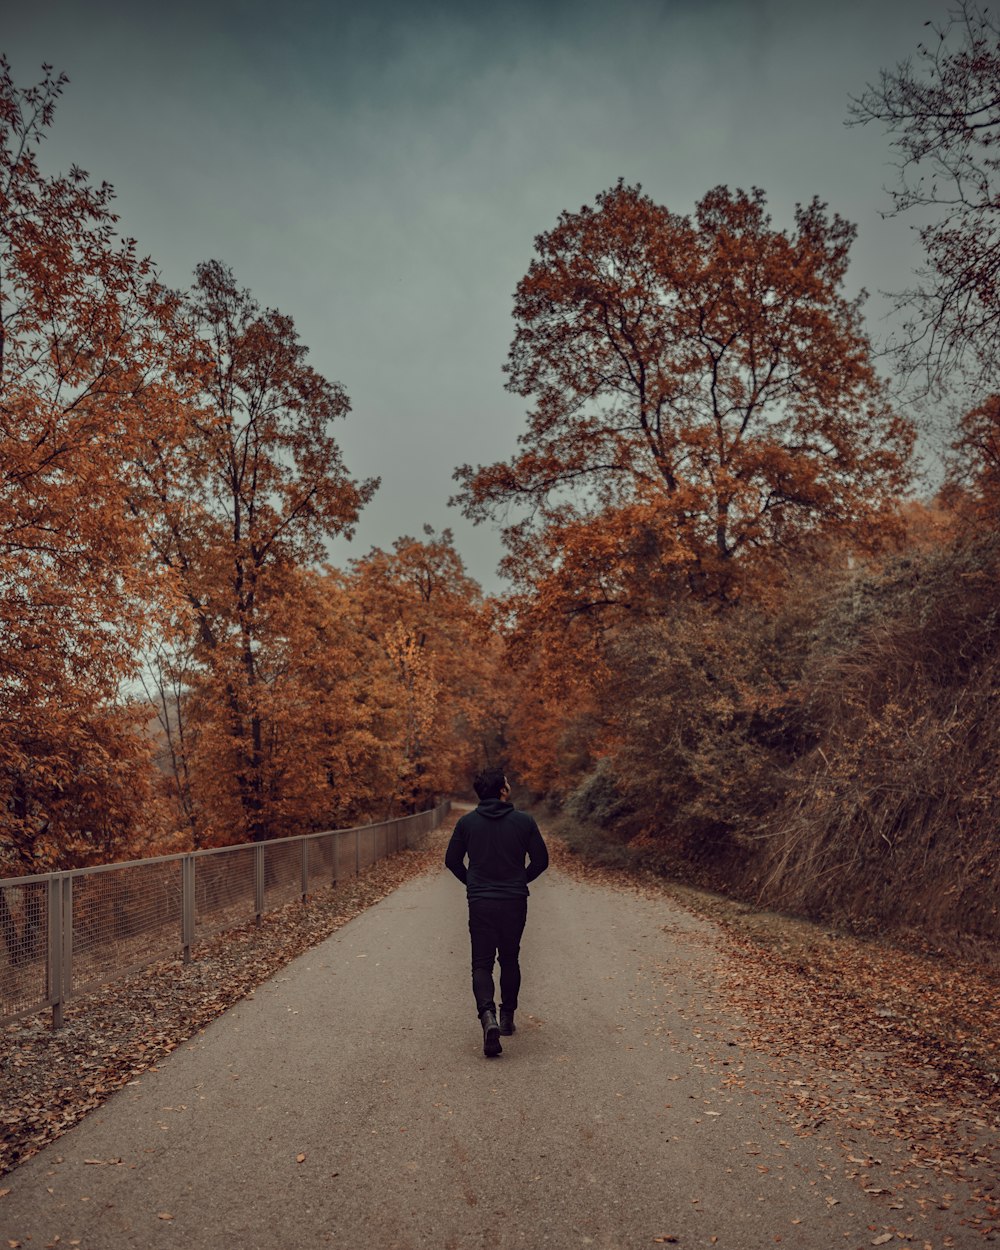 a person walking on a road with trees on either side of it